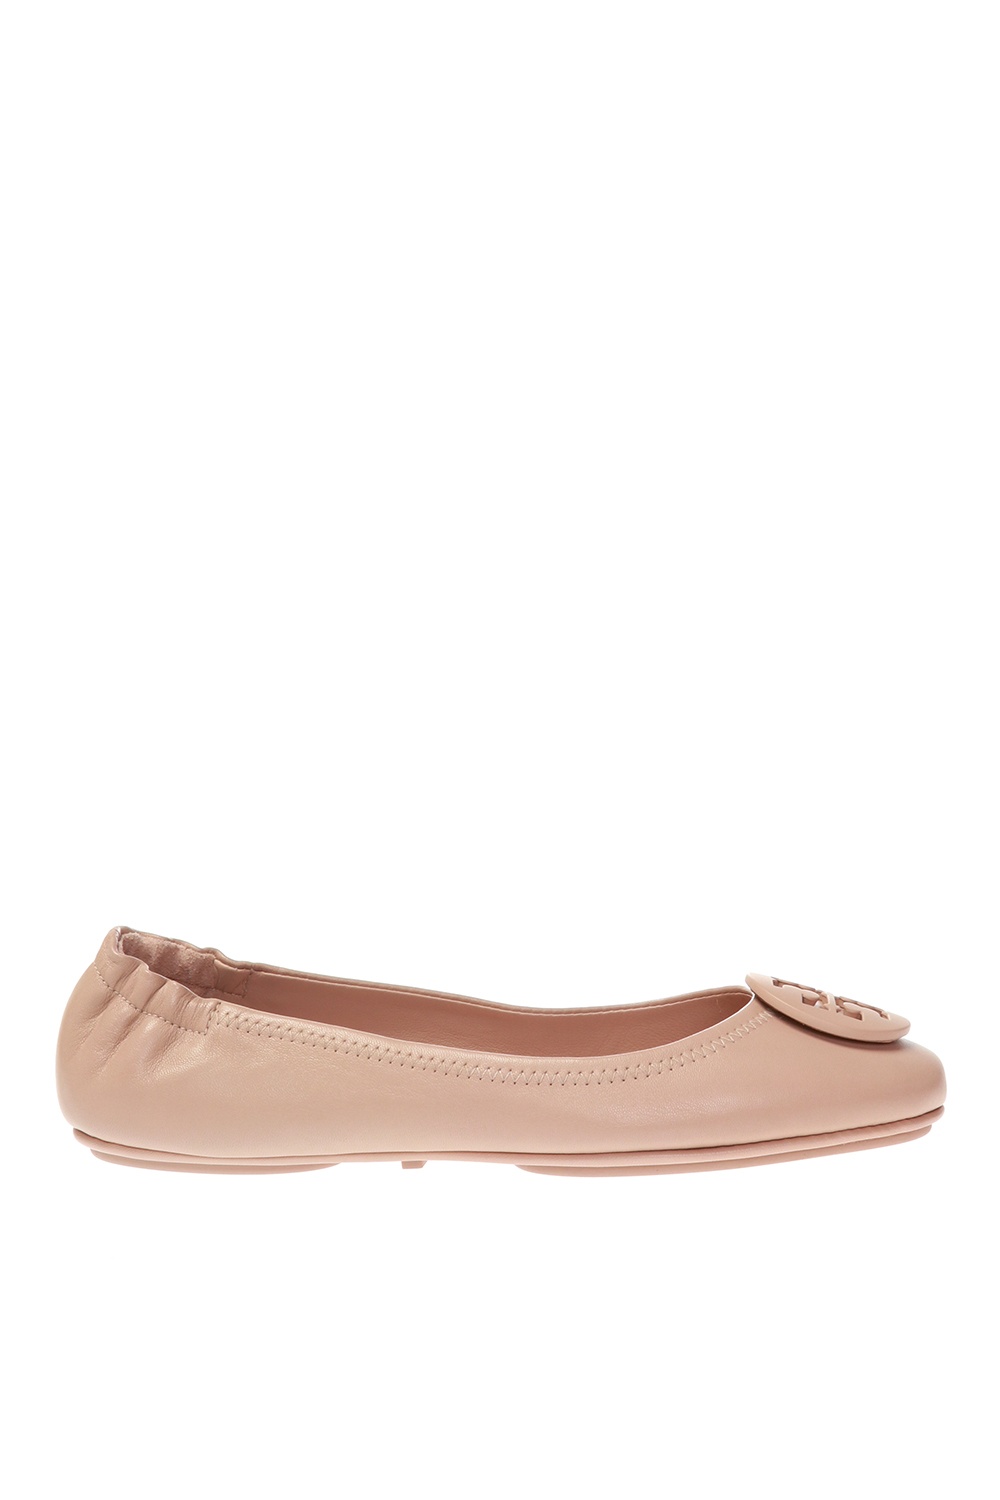 Tory Burch Leather ballet flats with logo | Women's Shoes | Vitkac